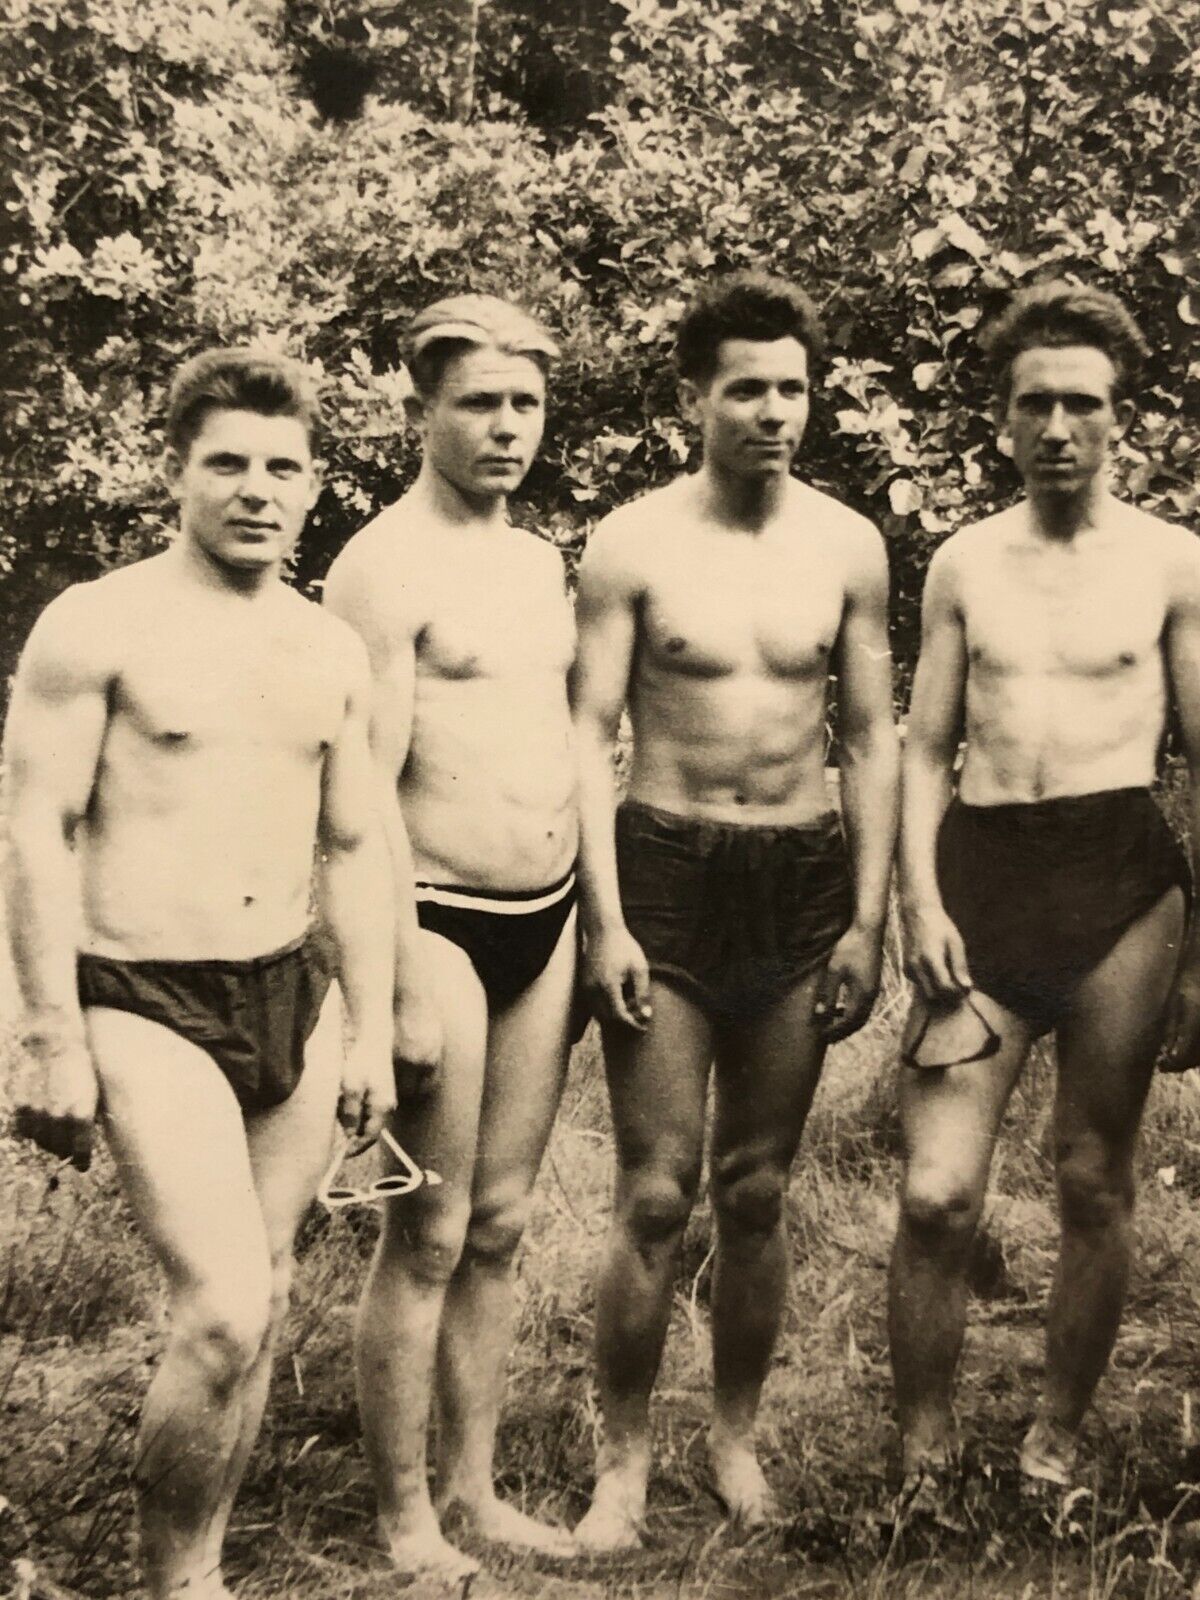 1950s Four Shirtless Muscular Handsome Guys Trunks Bulge Gay int Vintage Photo